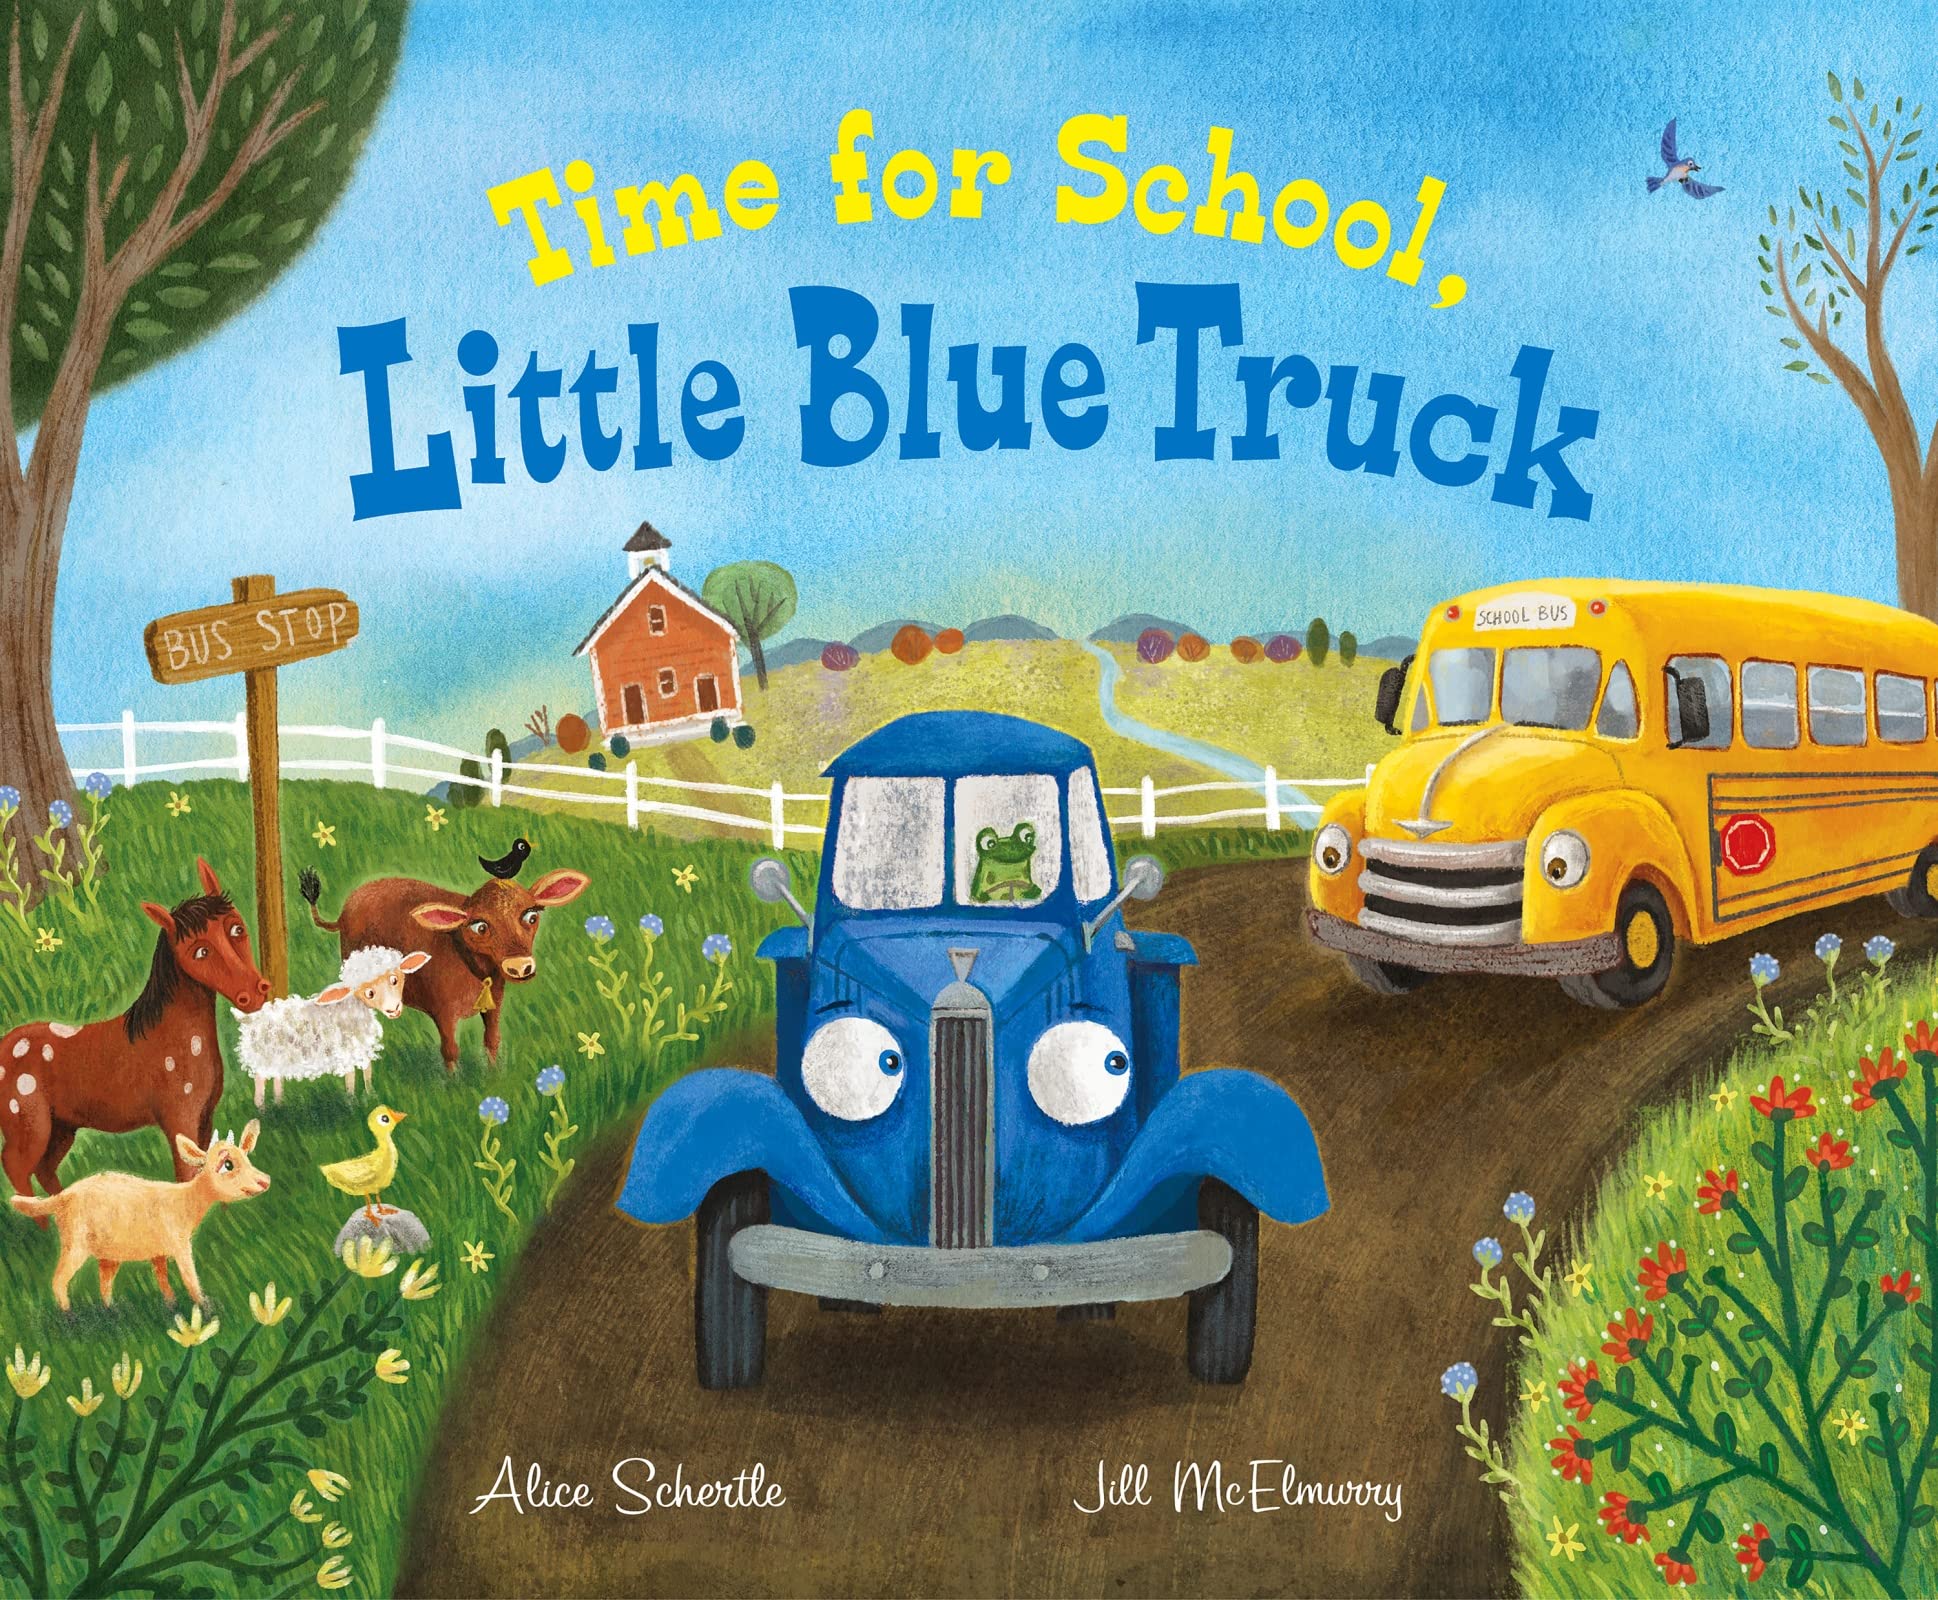 speech and language teaching concepts for Time for School Little Blue Truck in speech therapy​ ​